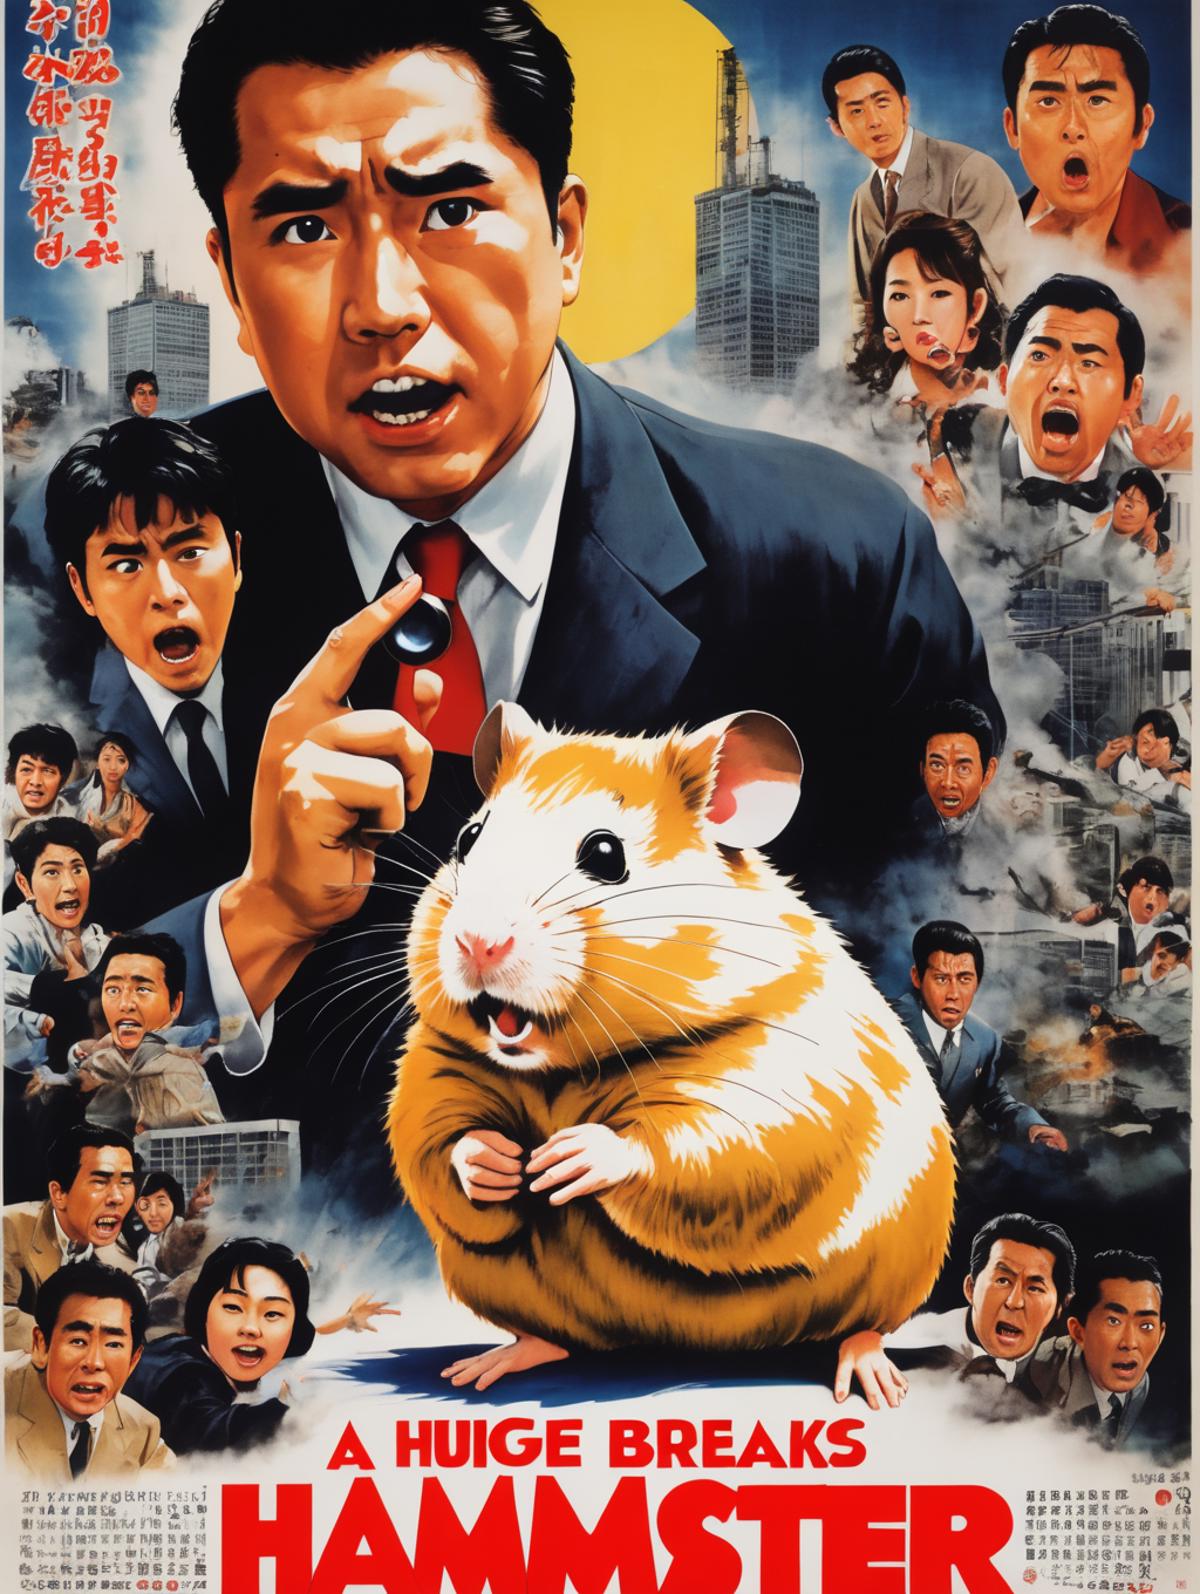 A man in a suit is pointing at a hamster in front of a crowd of people.